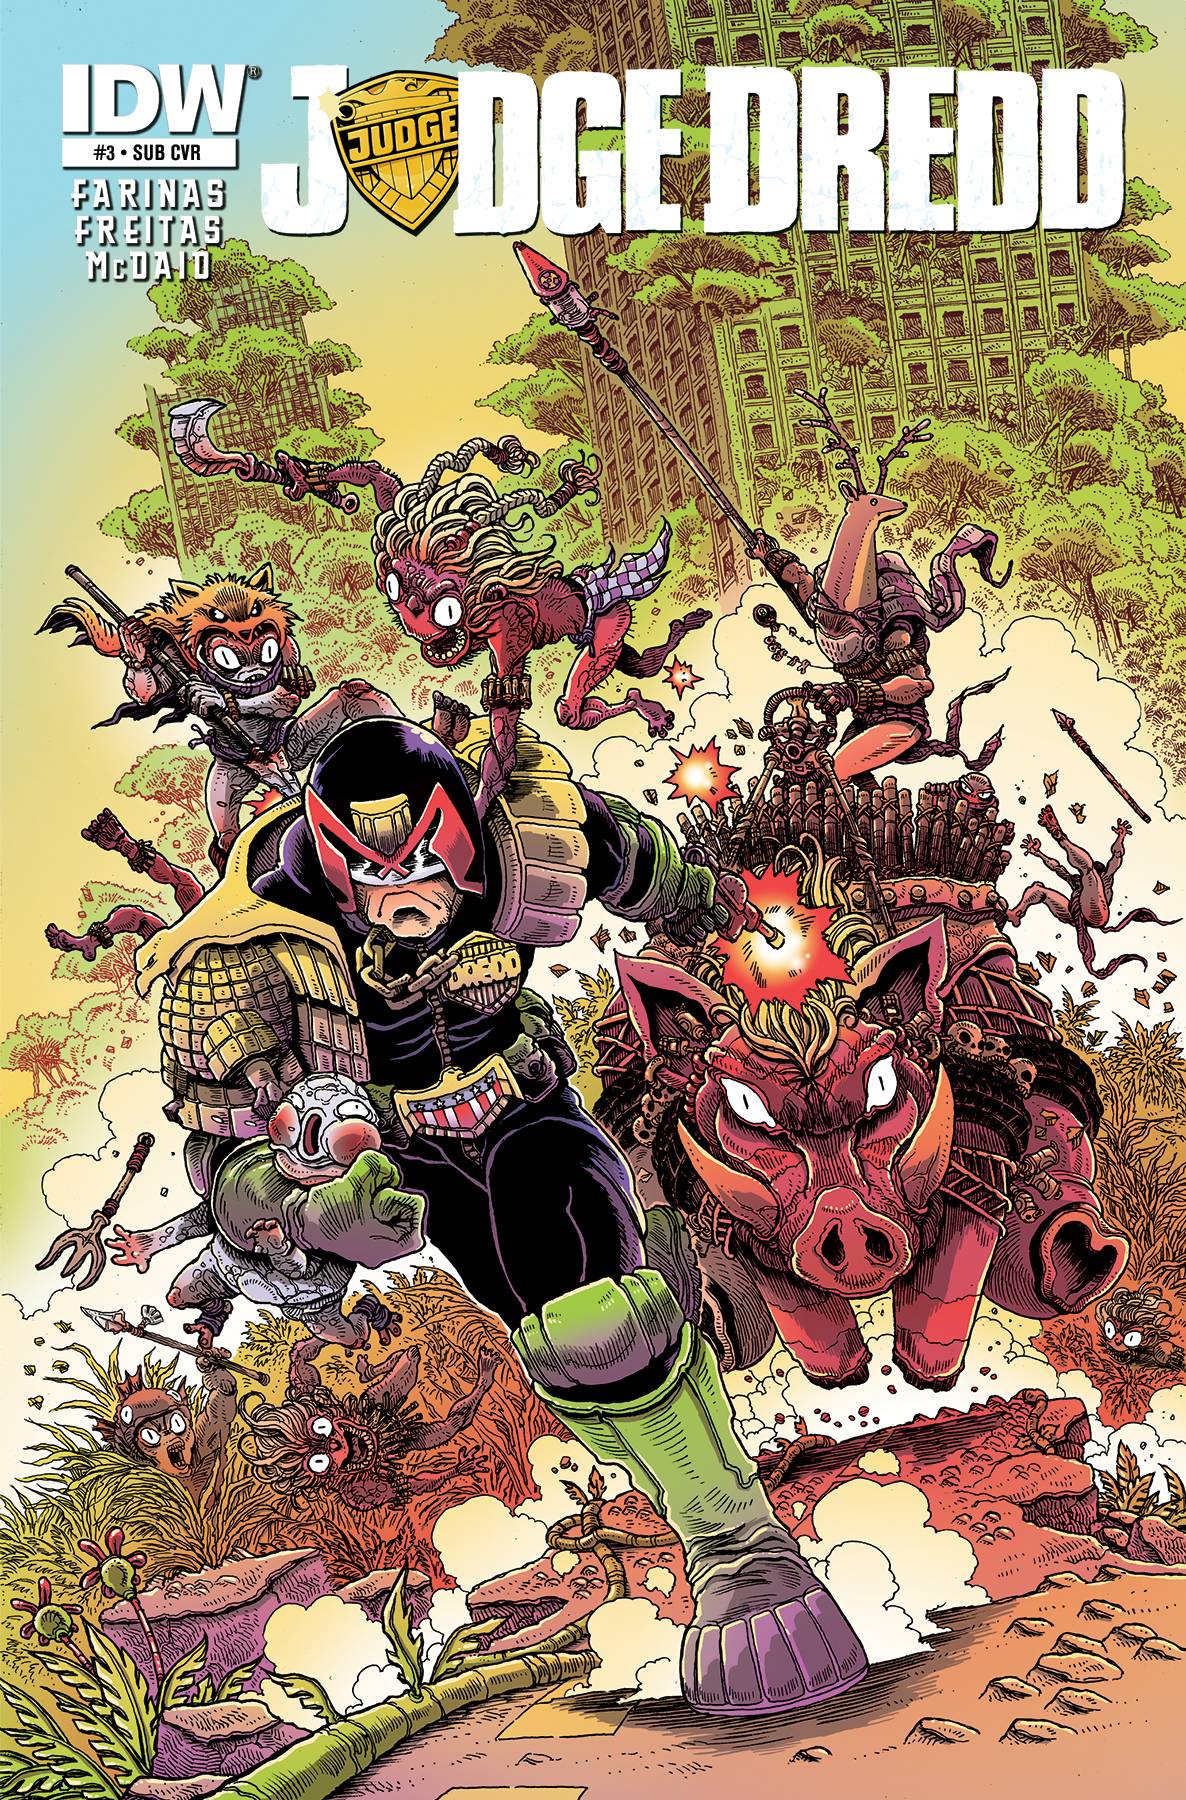 Judge Dredd (Ongoing) #3 Subscription Variant